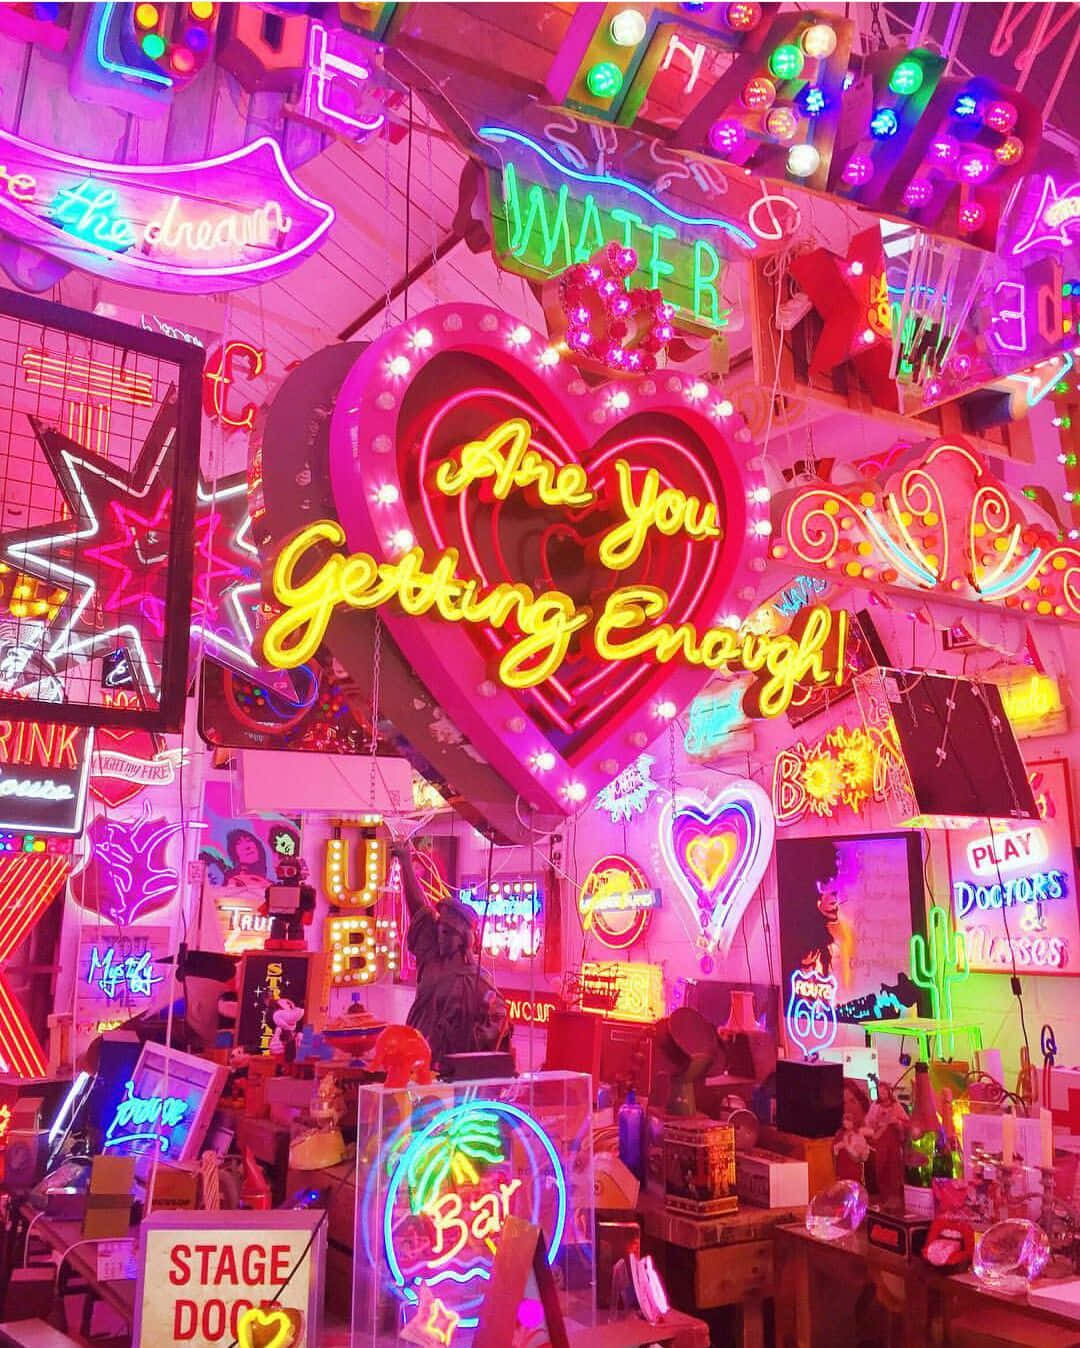 Let neon light up your life!